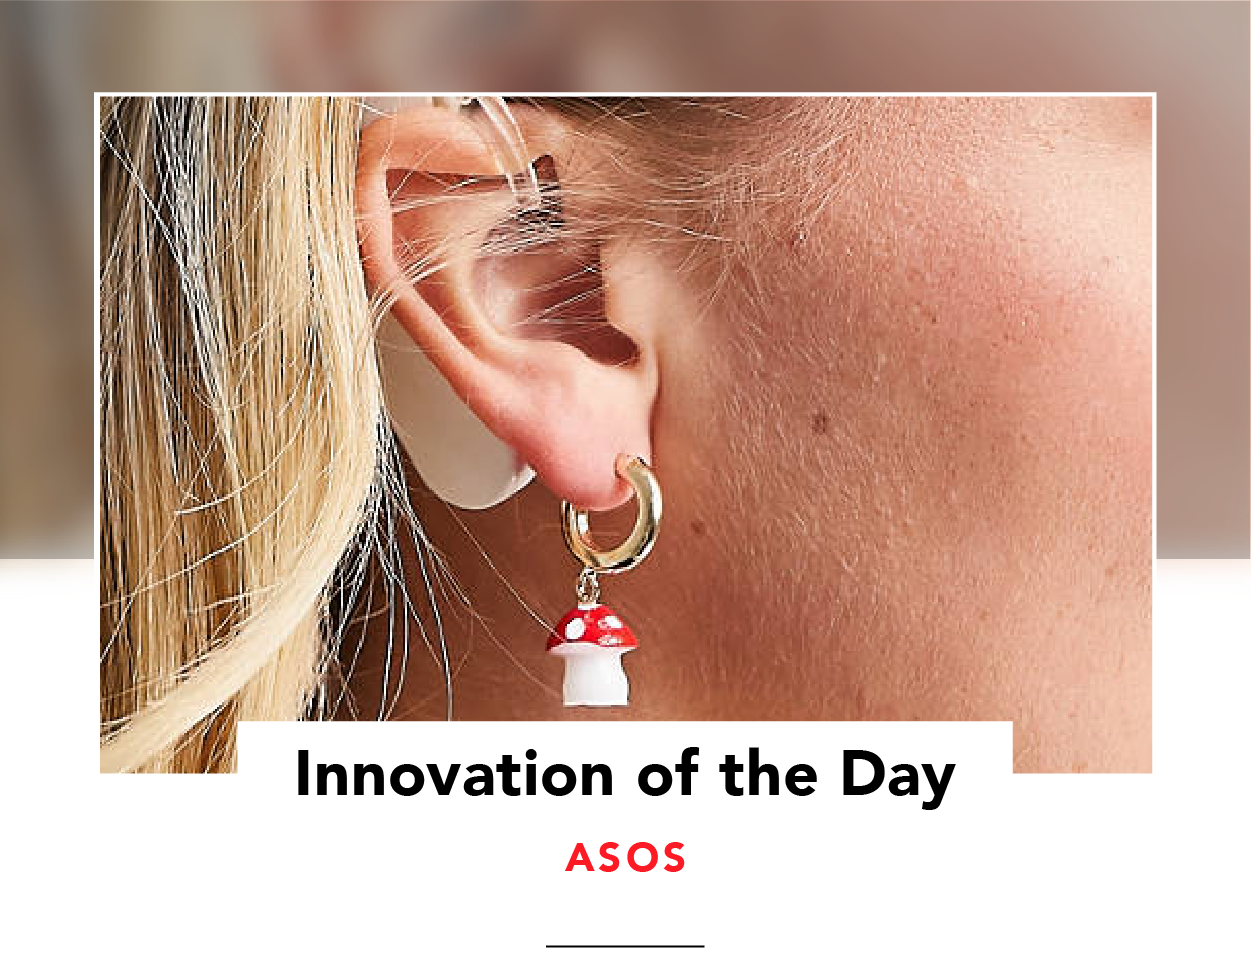 Product image of a mushroom-shaped earring, in an ear wearing a hearing device